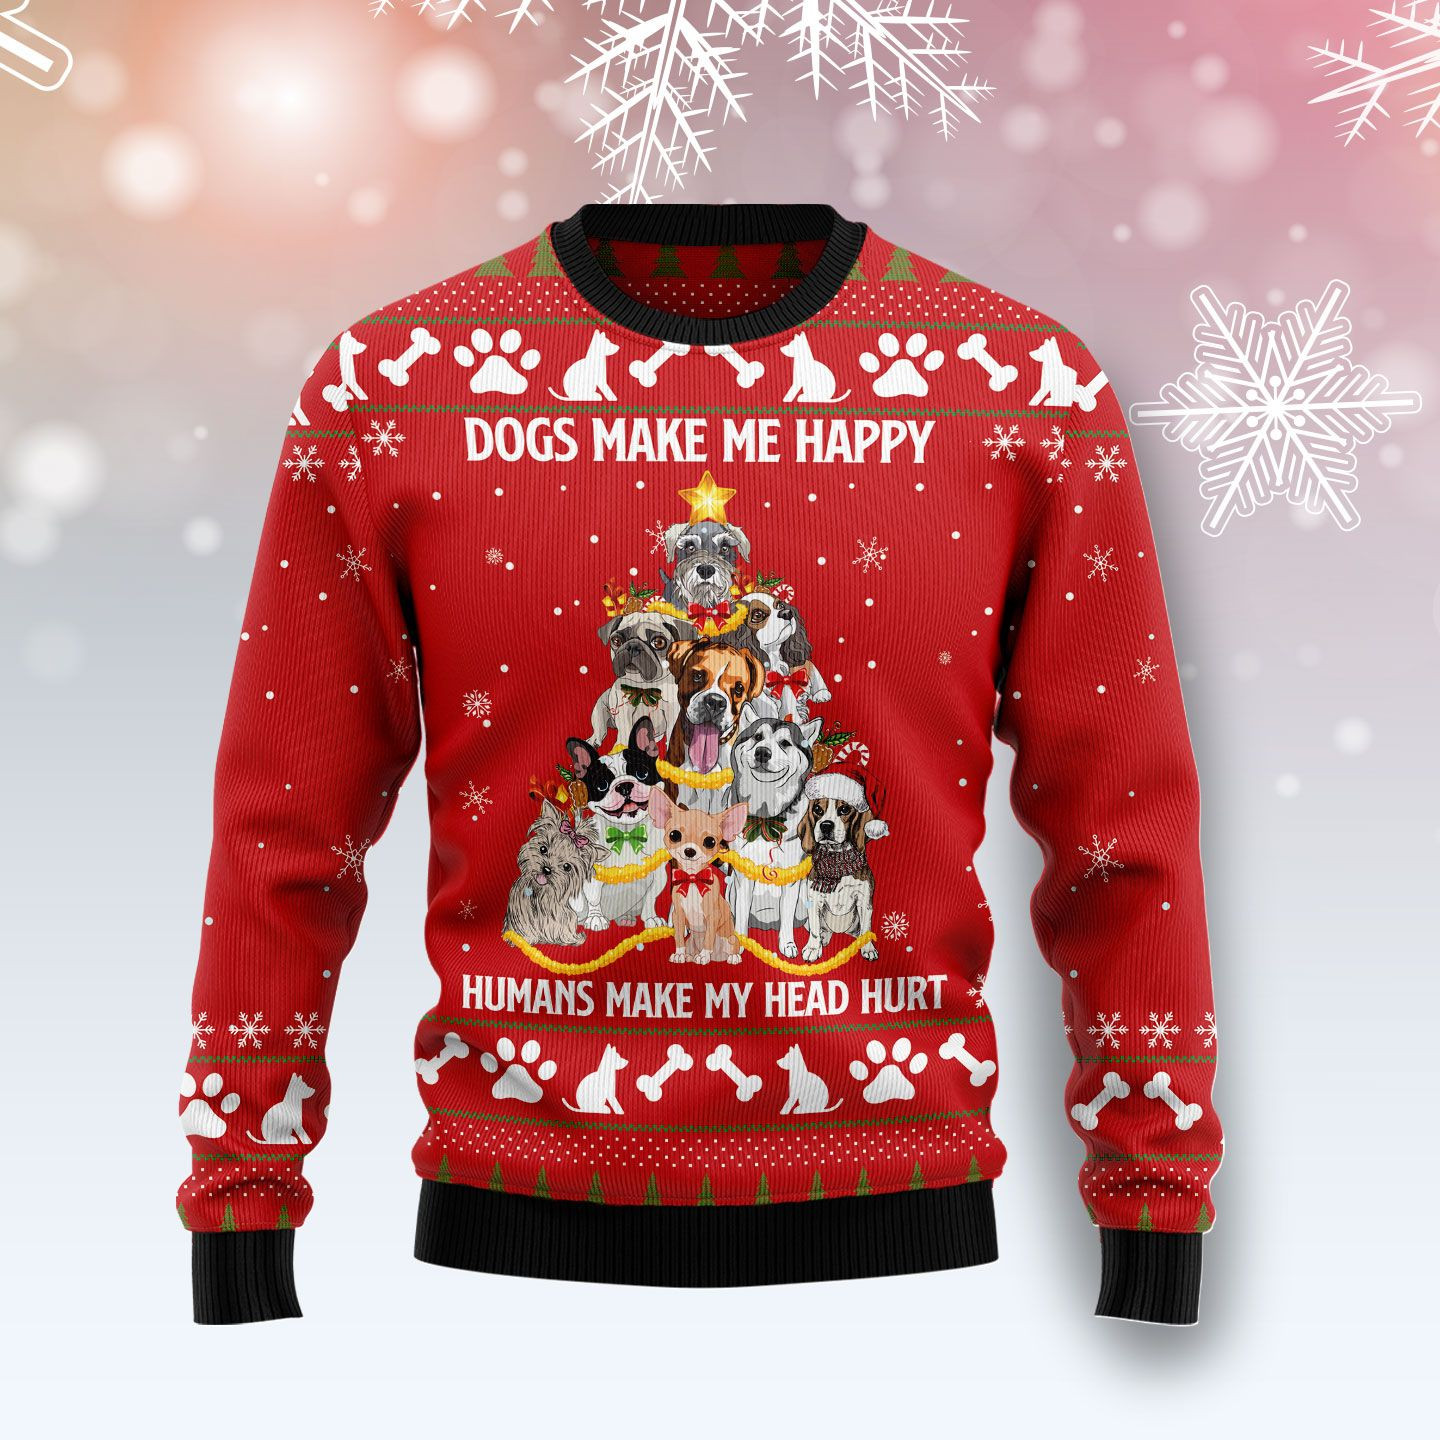 Dogs Make Me Happy Ugly Christmas Sweater Ugly Sweater For Men Women, Holiday Sweater